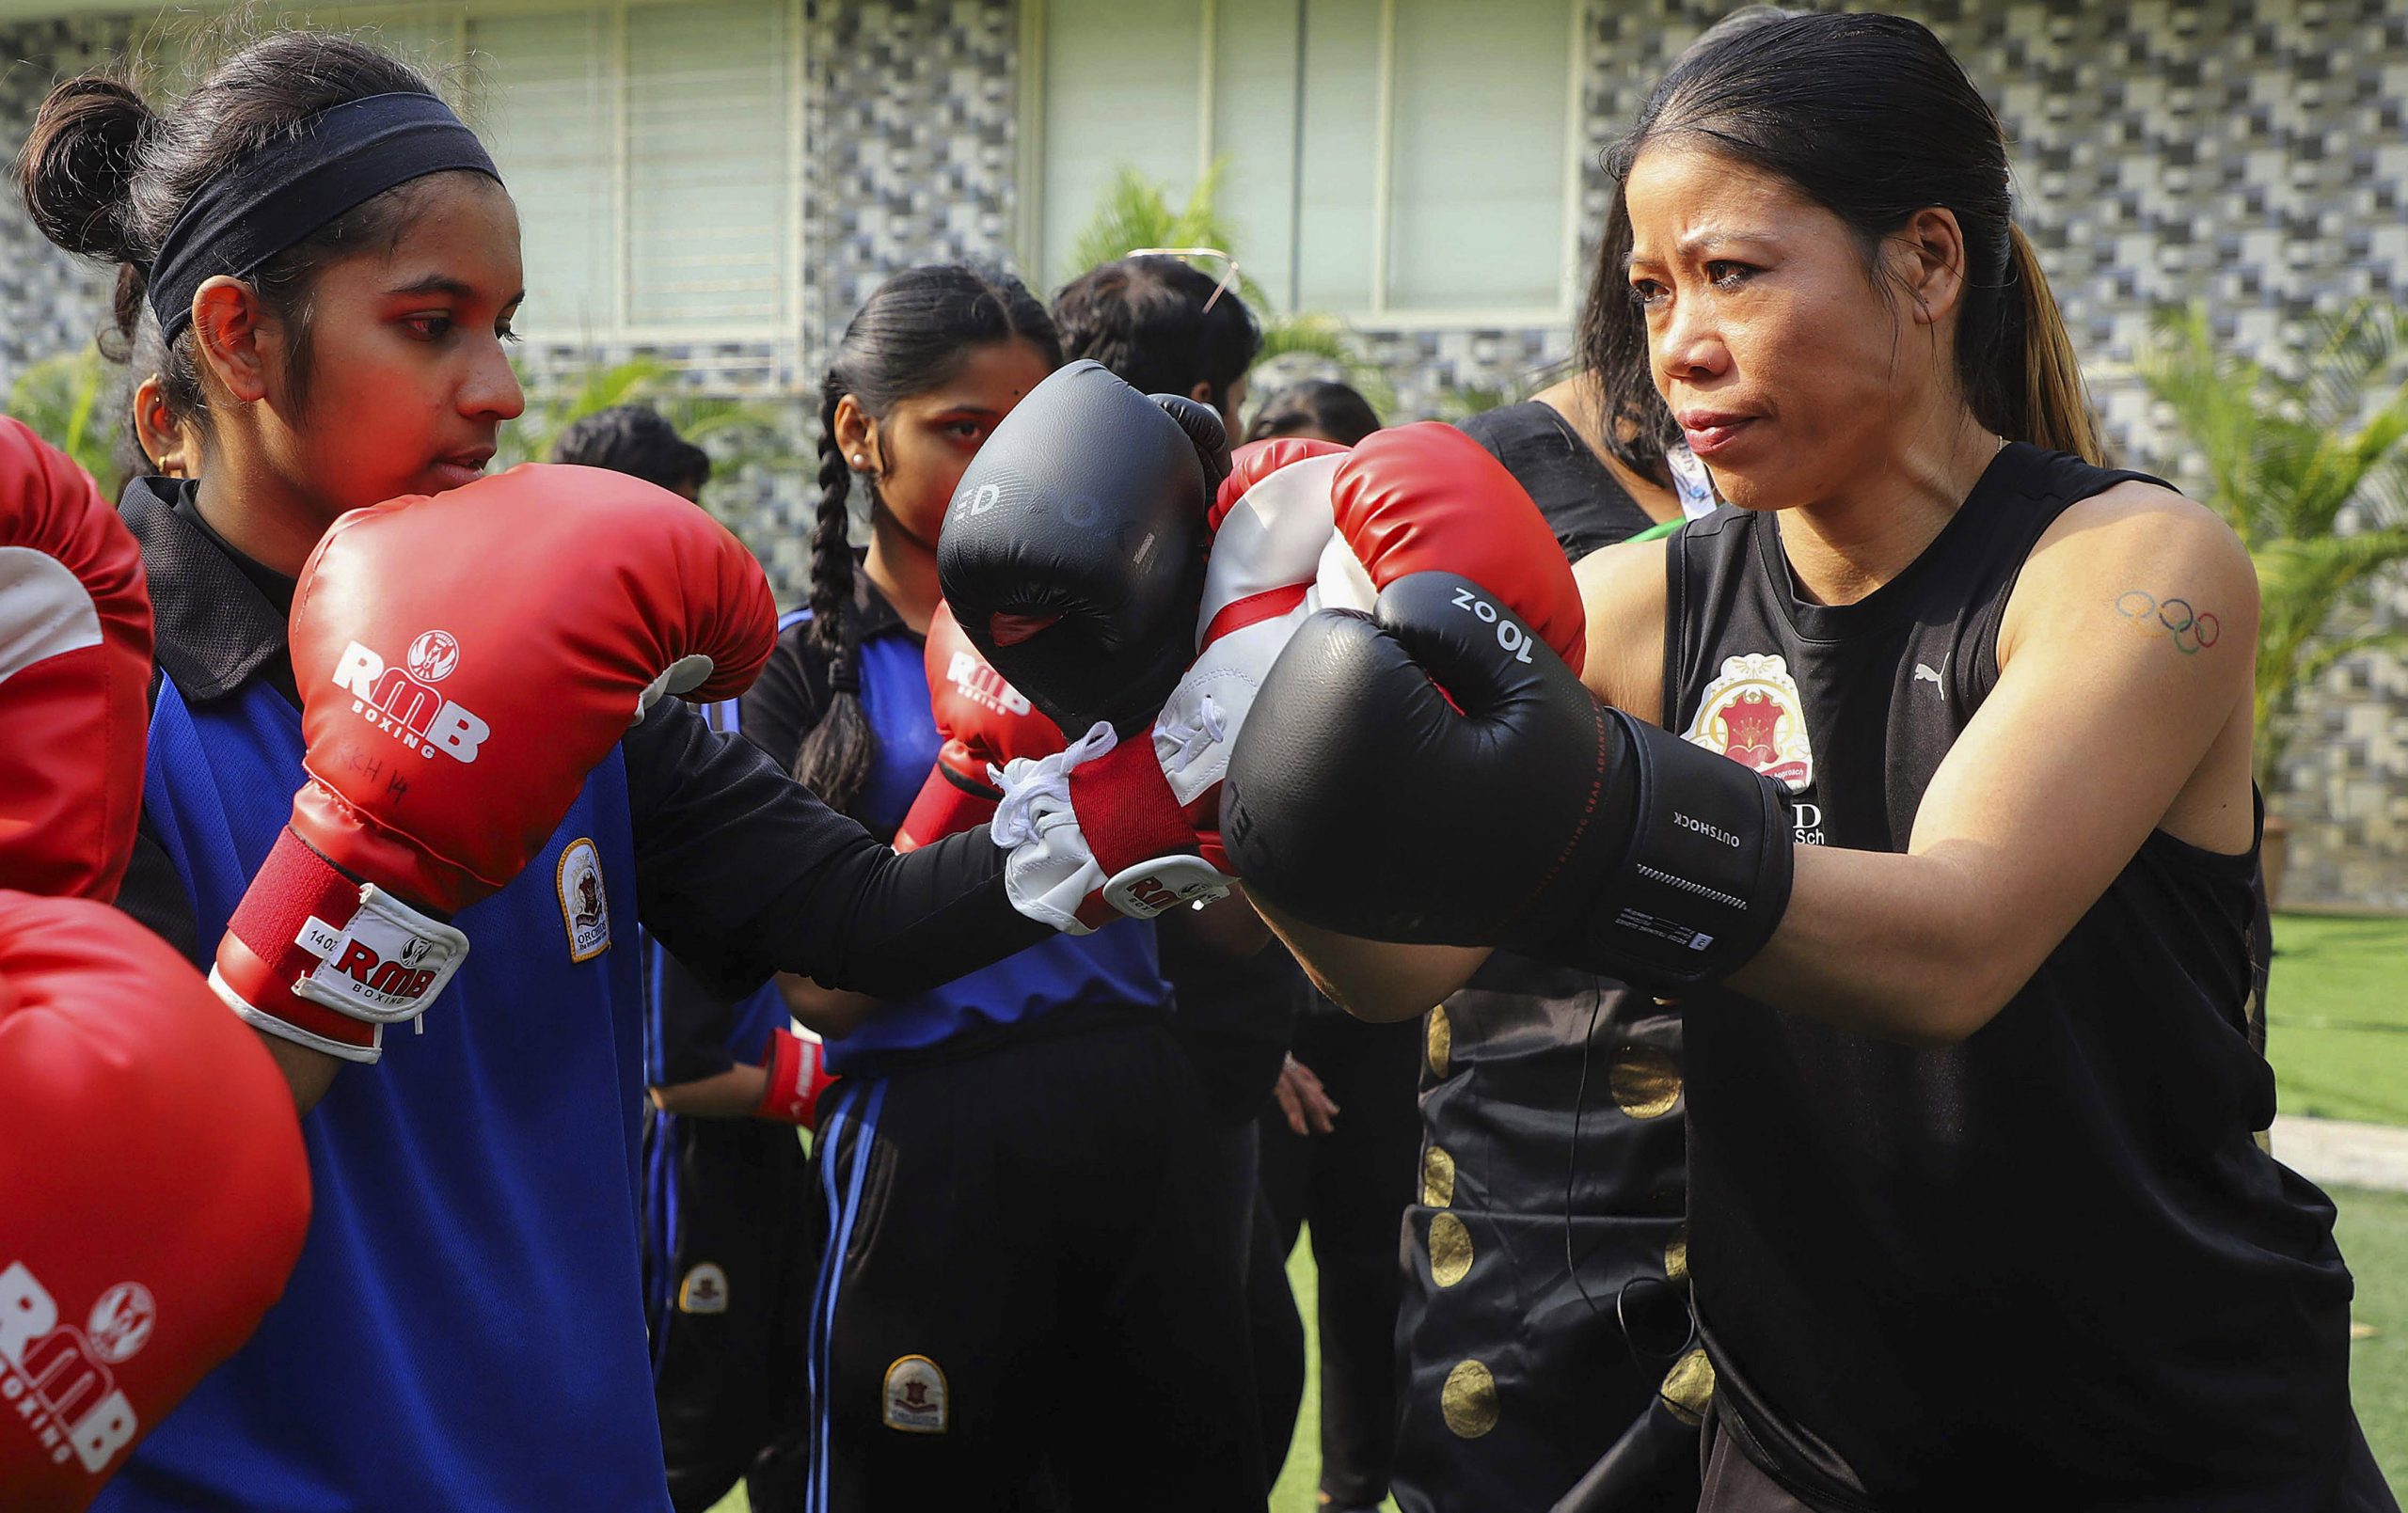 I Have Not Announced Retirement Yet; Have Been Misquoted: M C Mary Kom